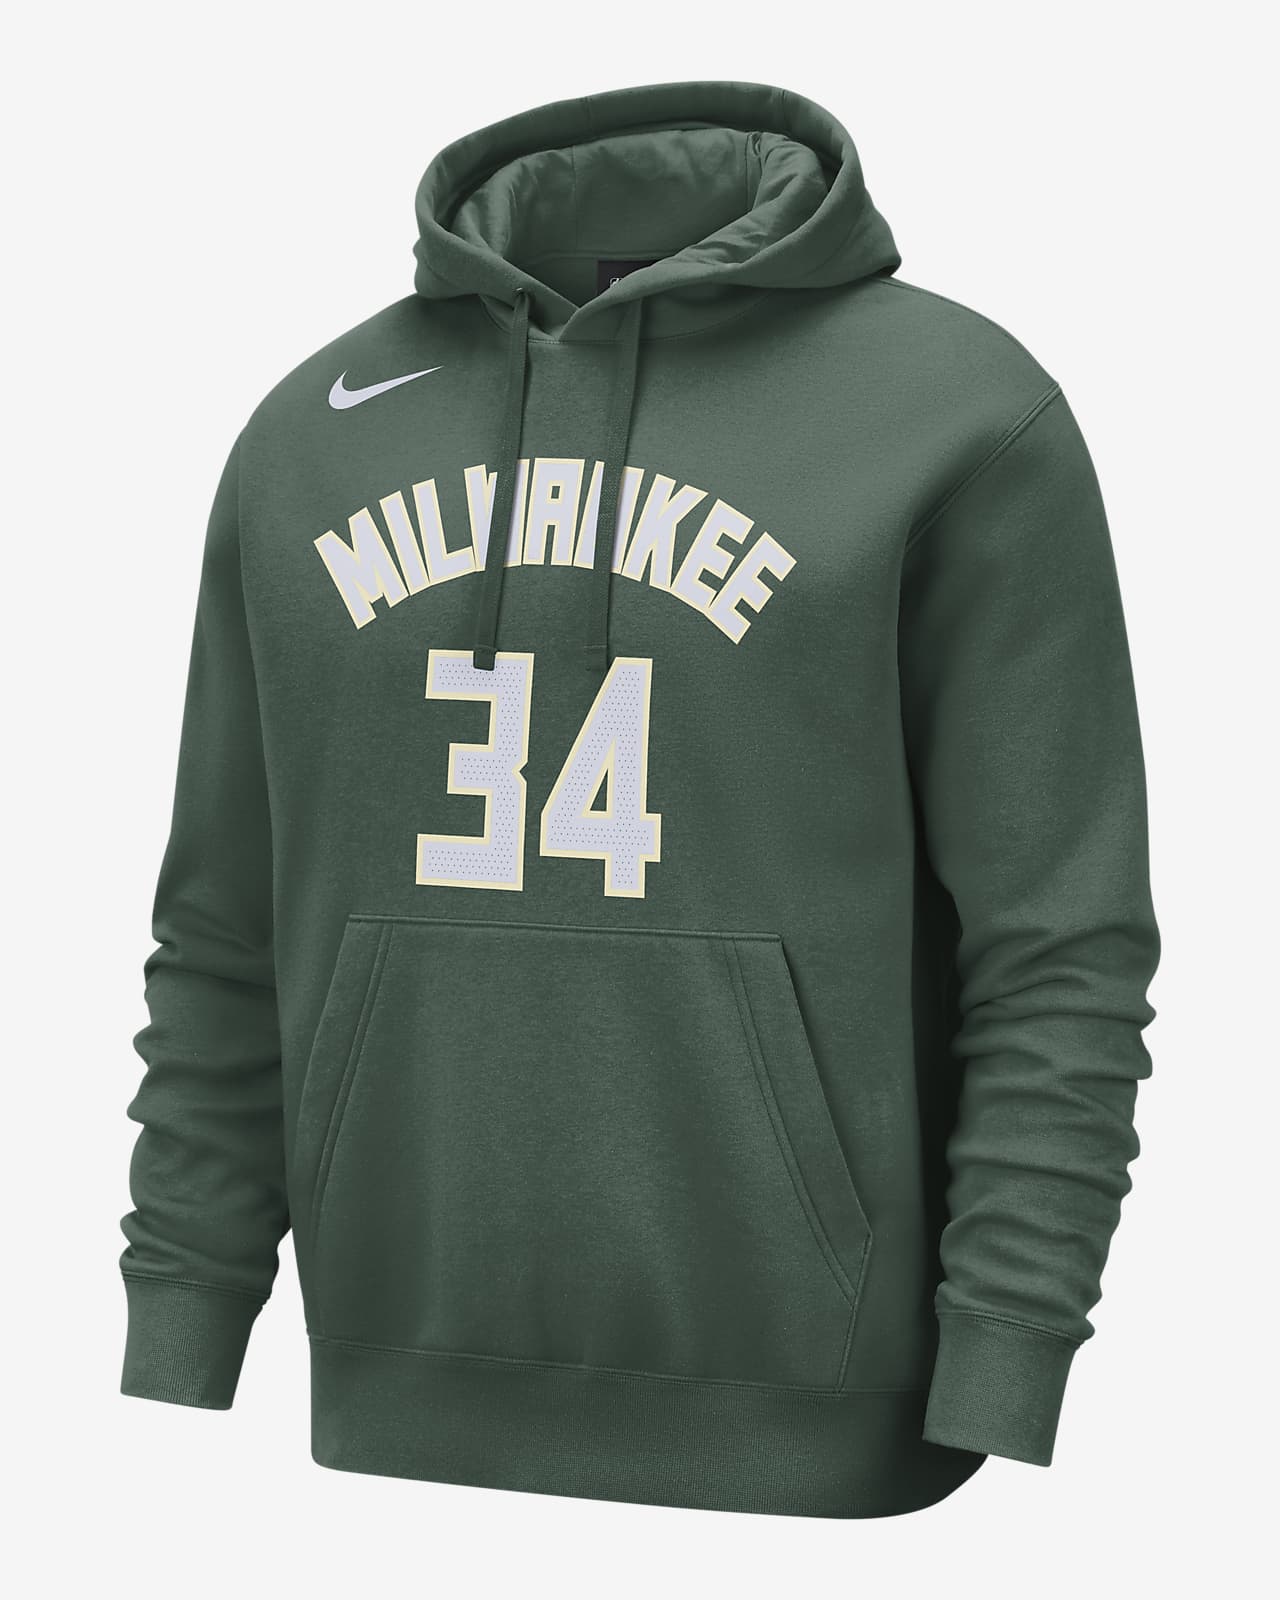 https://static.nike.com/a/images/t_PDP_1280_v1/f_auto,q_auto:eco/b9fd27bb-7d3e-4766-b00f-d2c7e26b2351/milwaukee-bucks-club-nba-pullover-hoodie-pg35tR.png